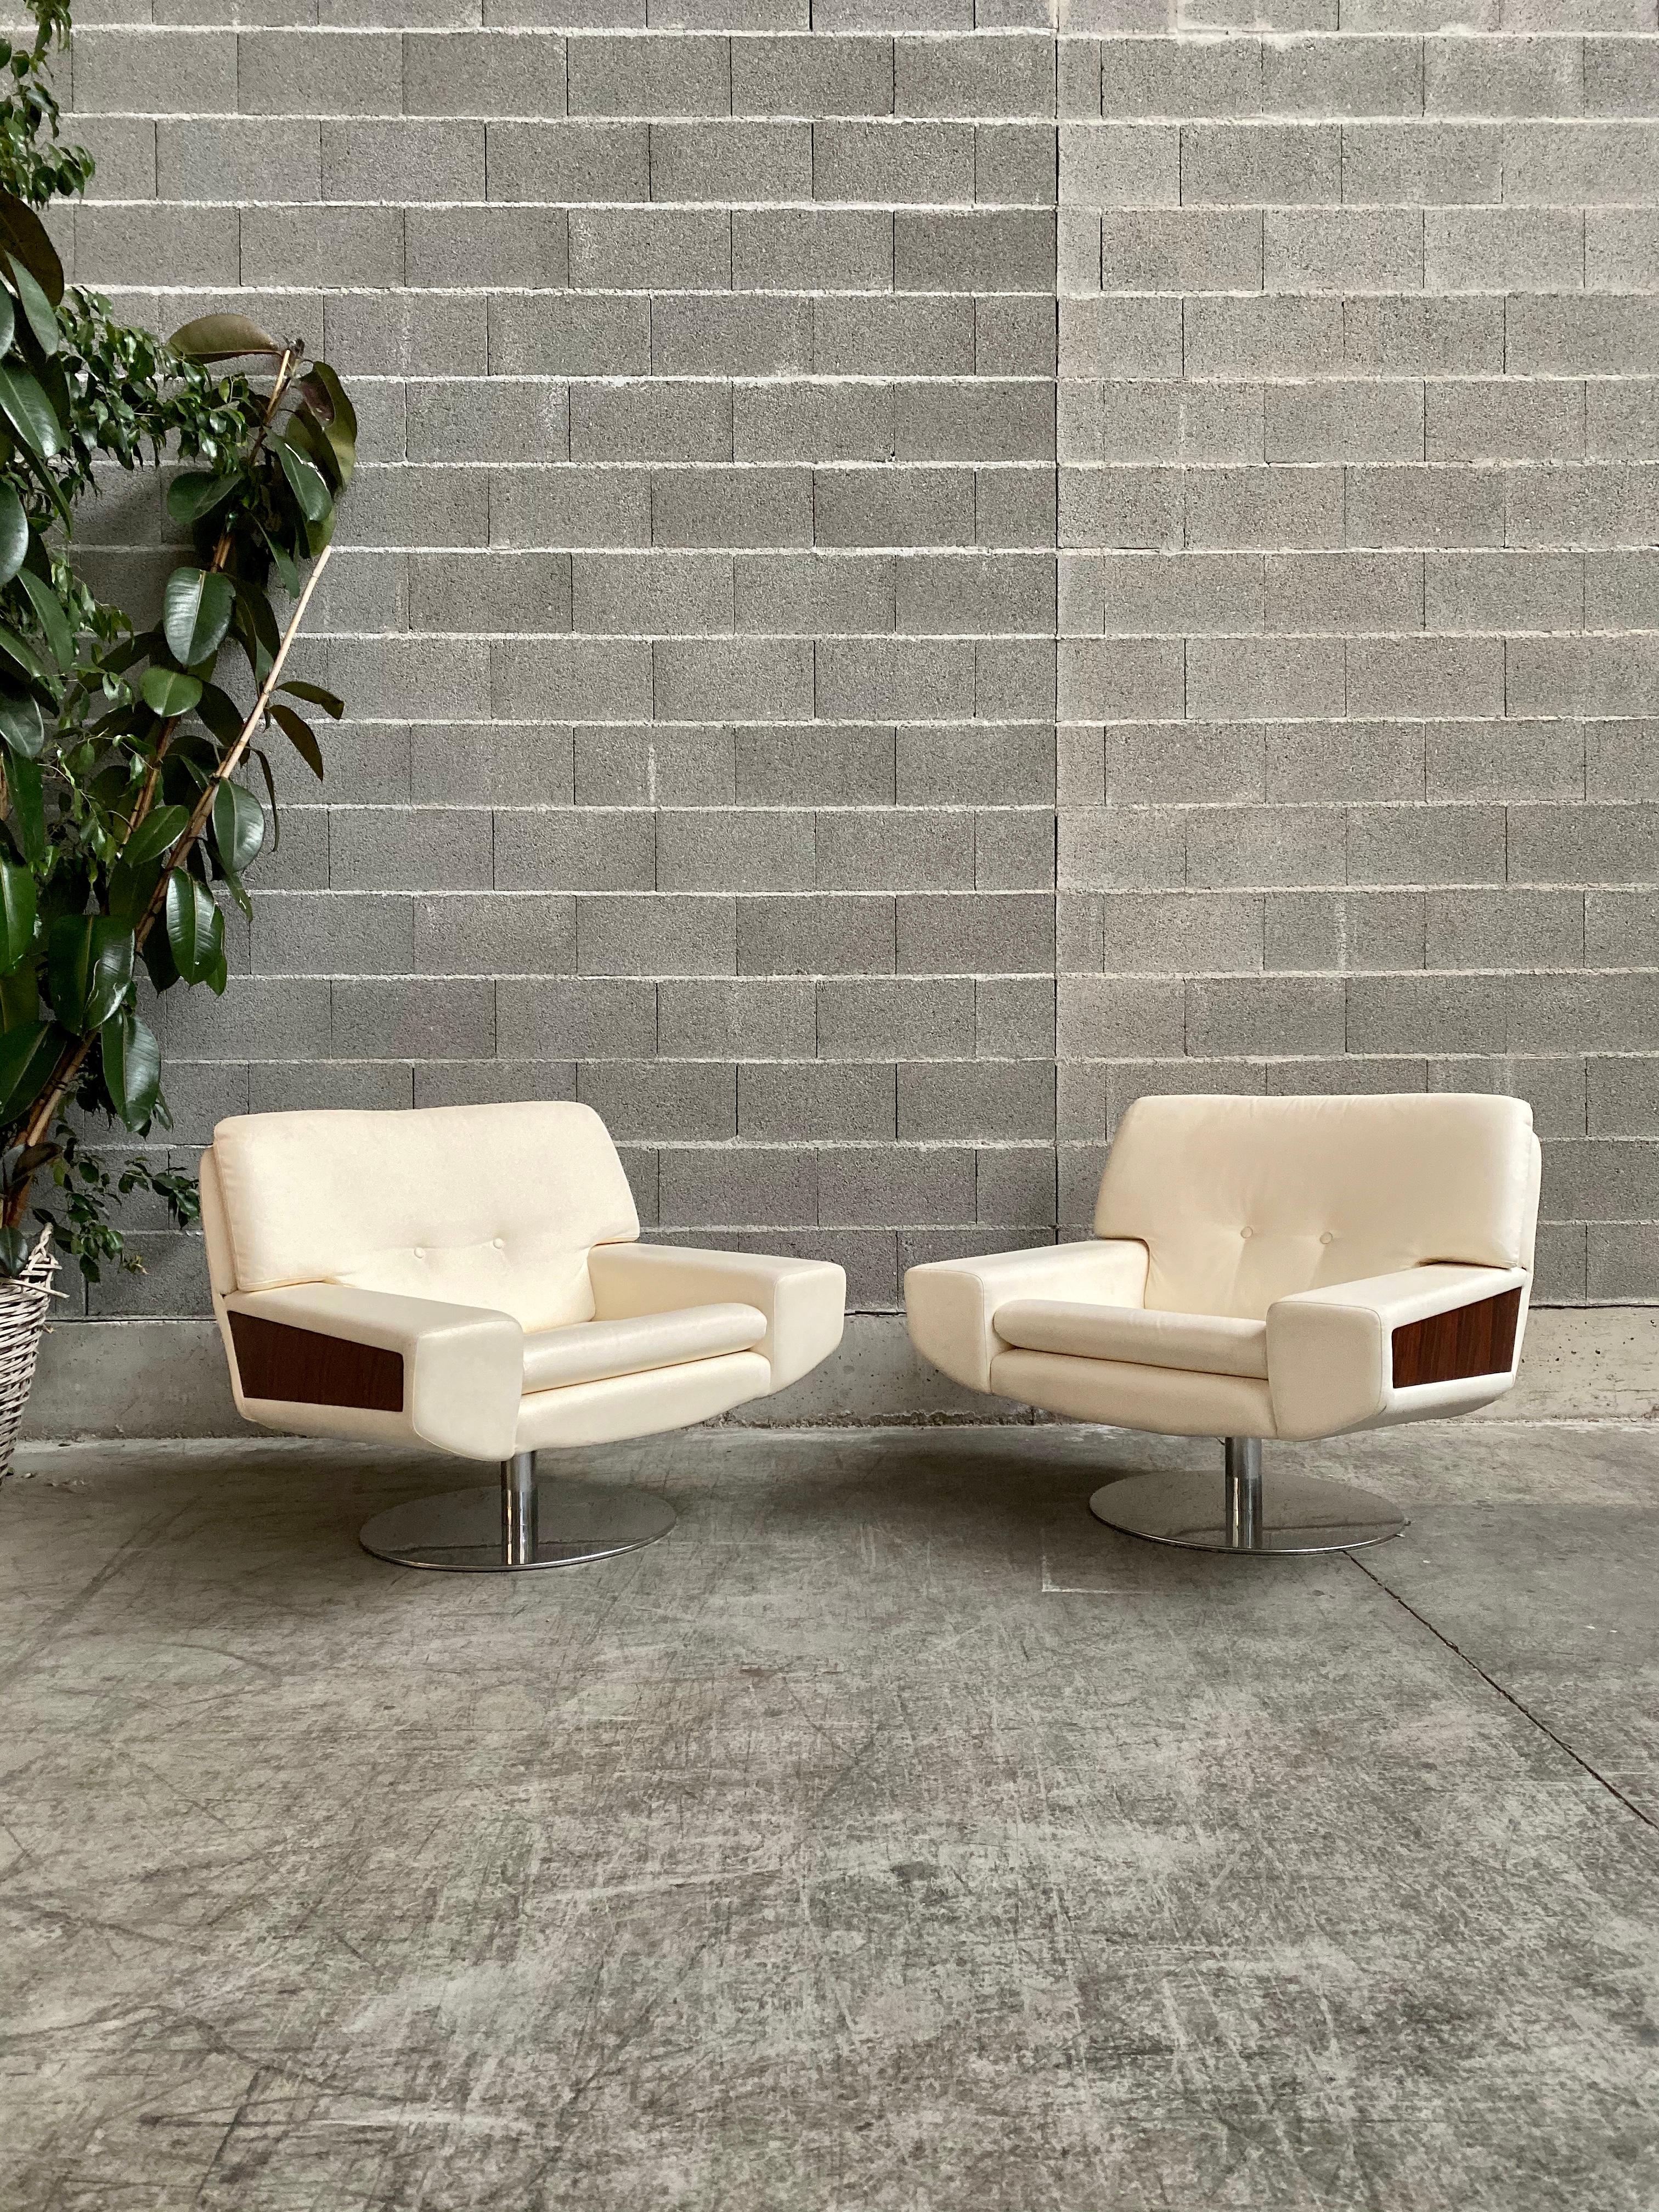 Space Age Italian leather armchairs, 1972, set of 2.

Nice pair of Space Age Italian armchairs, designed and manufactured in 1972.
Fully restored, this particular armchair stands on a round chrome base made of iron. The seat part has been fully